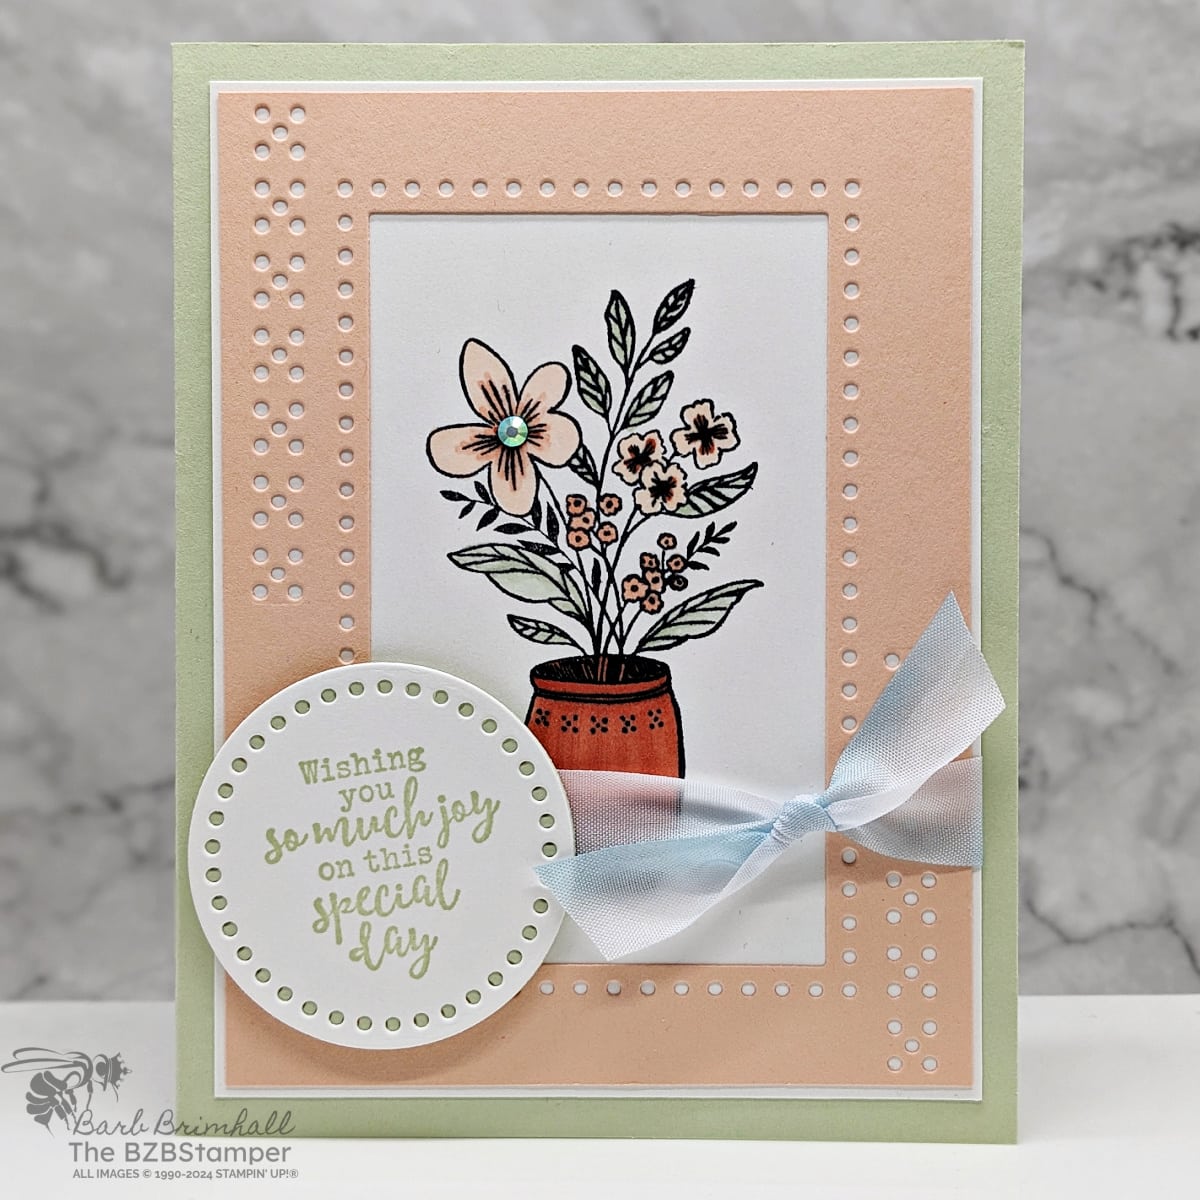 Tutorial Featuring The Everyday Details Bundle in light pinks and greens.  Features a vase with flowers and lots of die-cut details, including a sentiment on a circle and a blue ribbon.